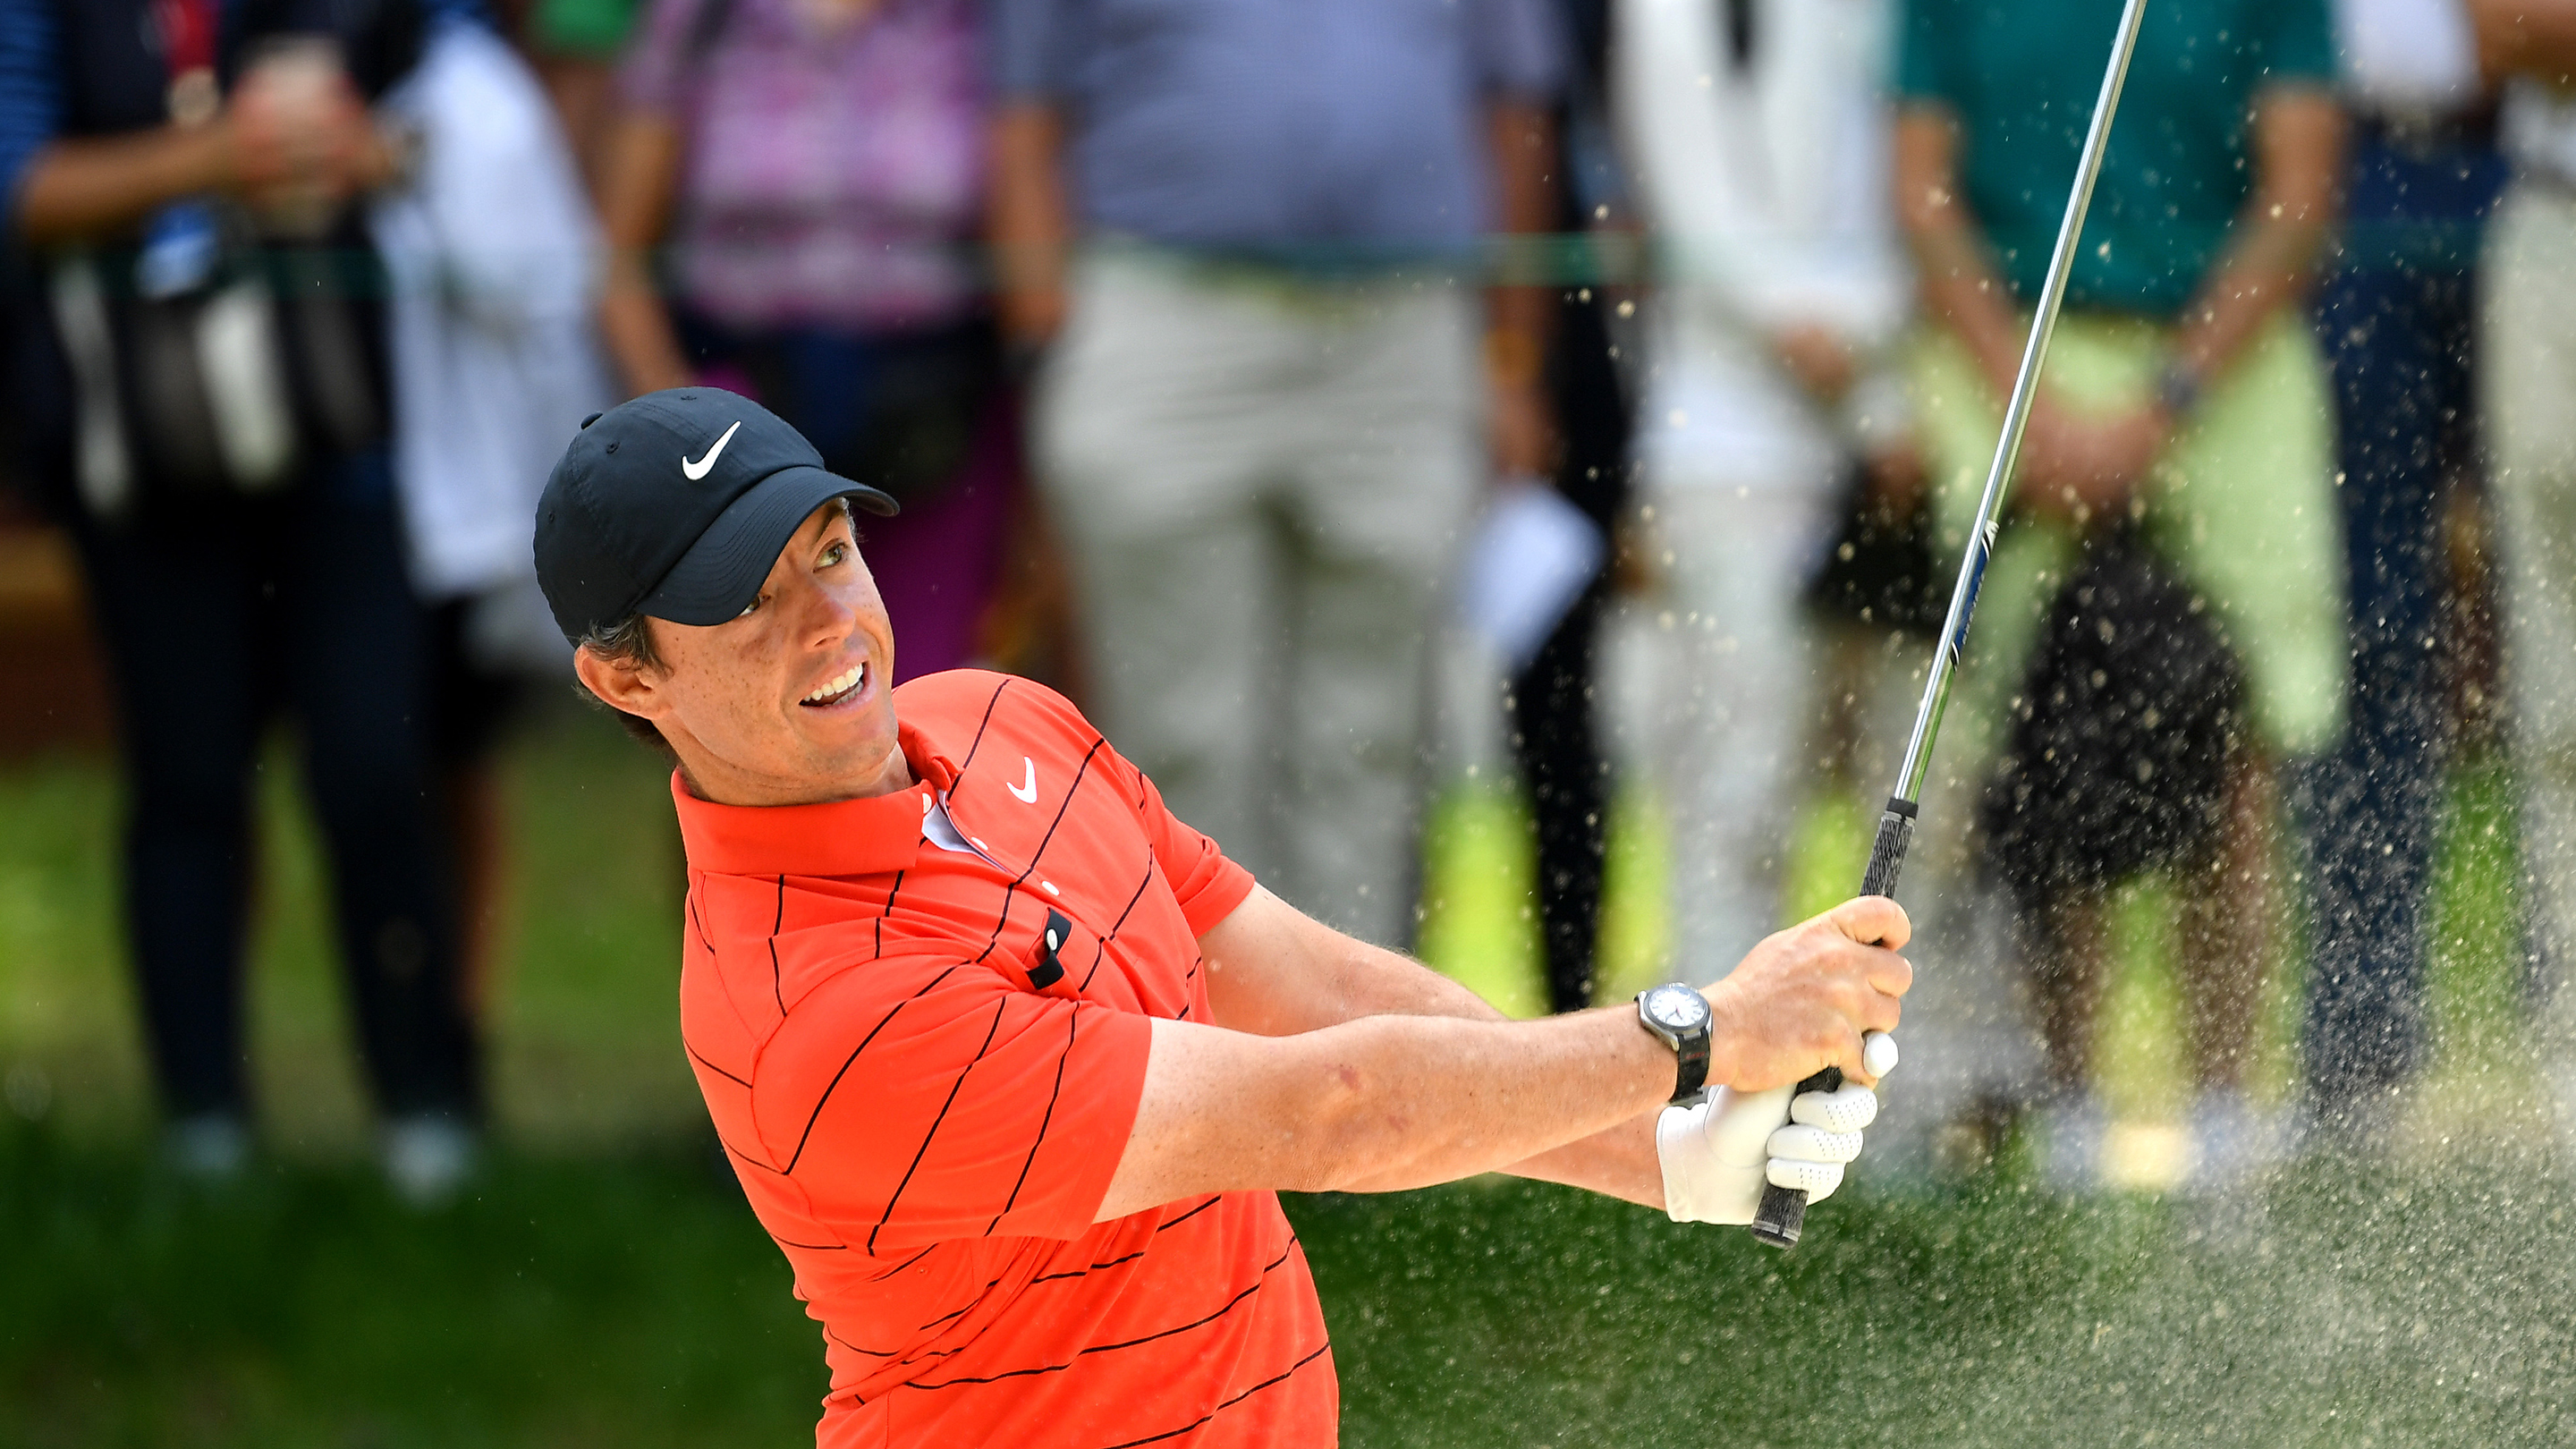 In Conversation Rory McIlroy On Watches, Omega, His Journey In Golf, And The Upcoming 2020 PGA Championship (VIDEO)